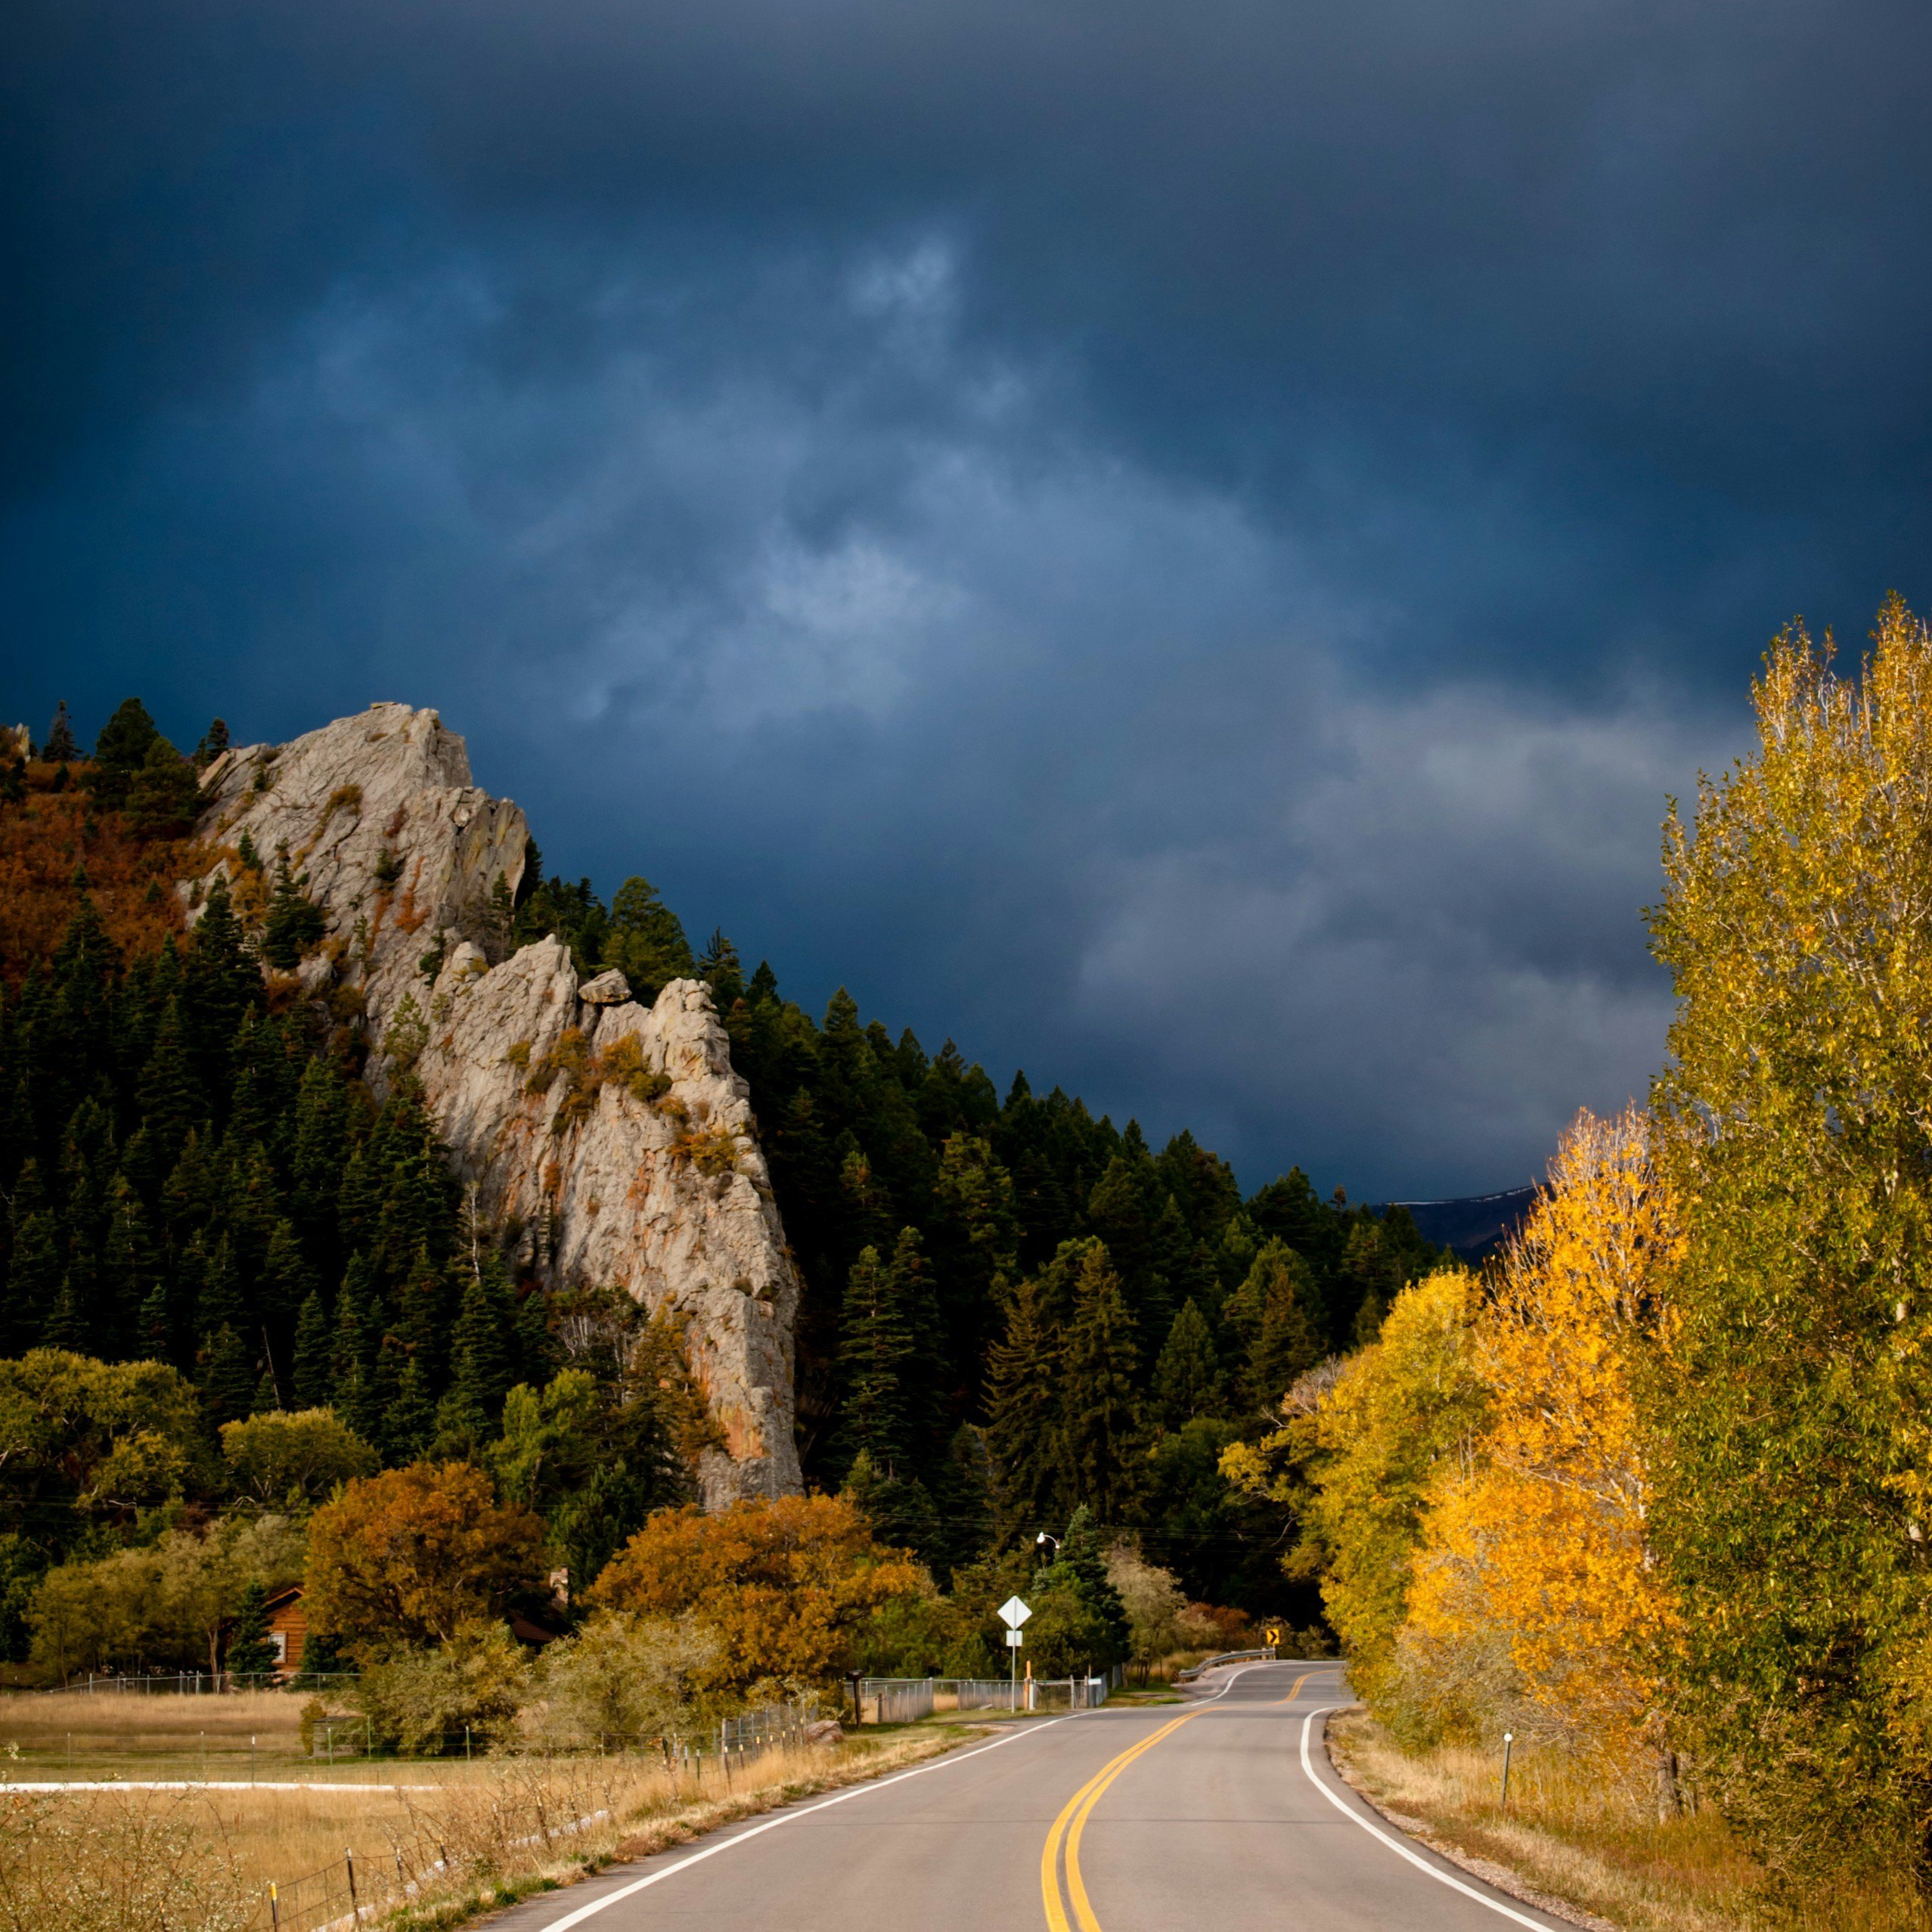 Storm clouds seen above the road along the Highway of Legends in Walsenburg, Colorado, Rocky Mountains, USA